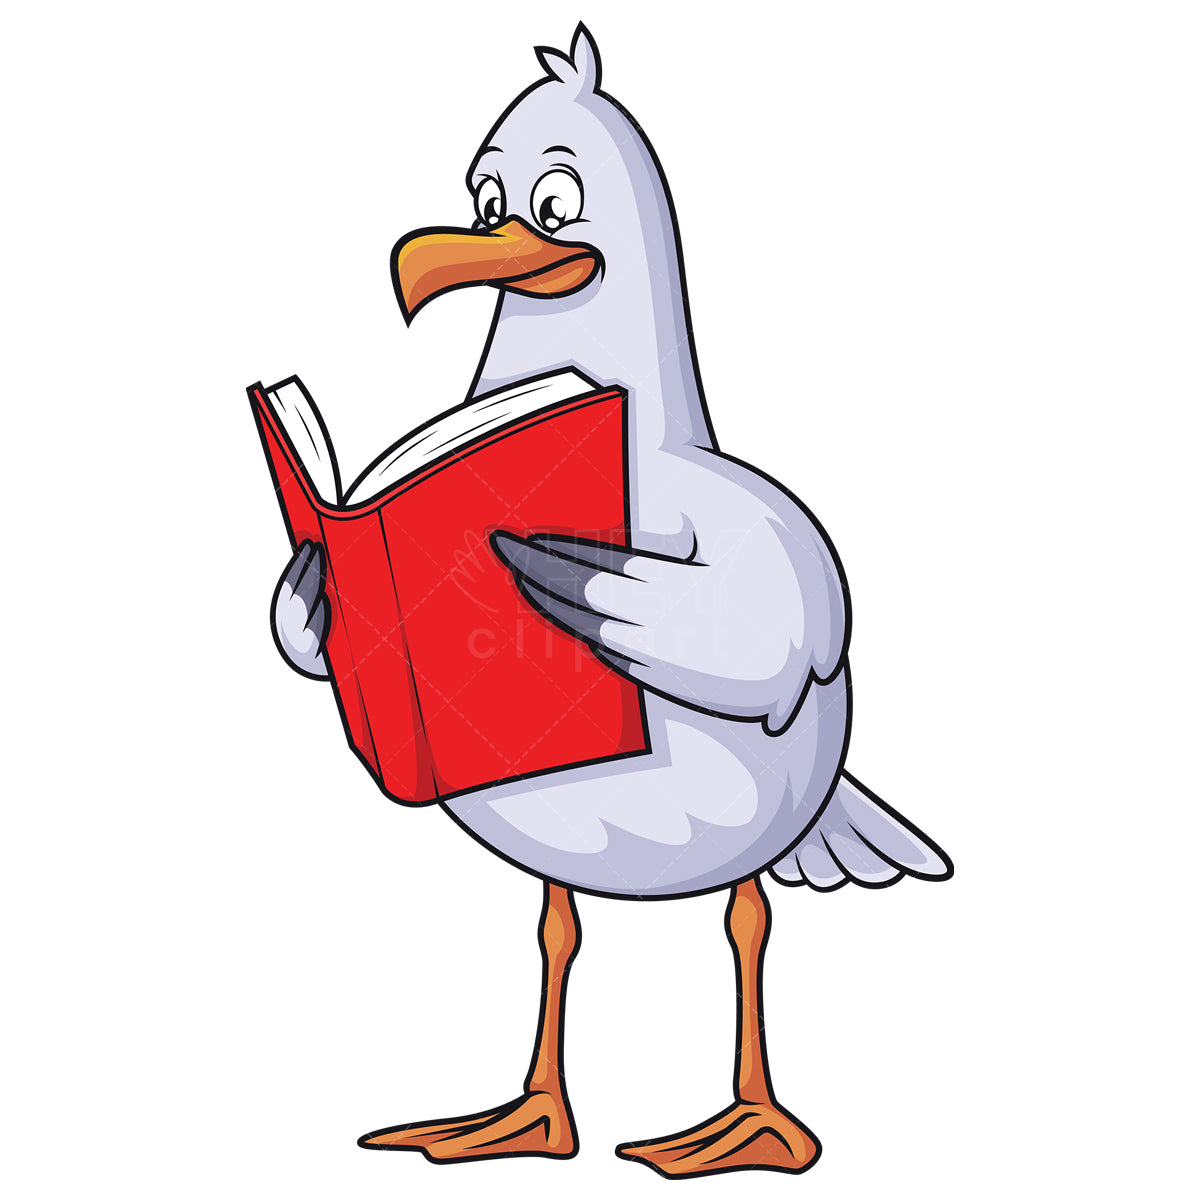 Royalty-free stock vector illustration of a seagull reading a book.